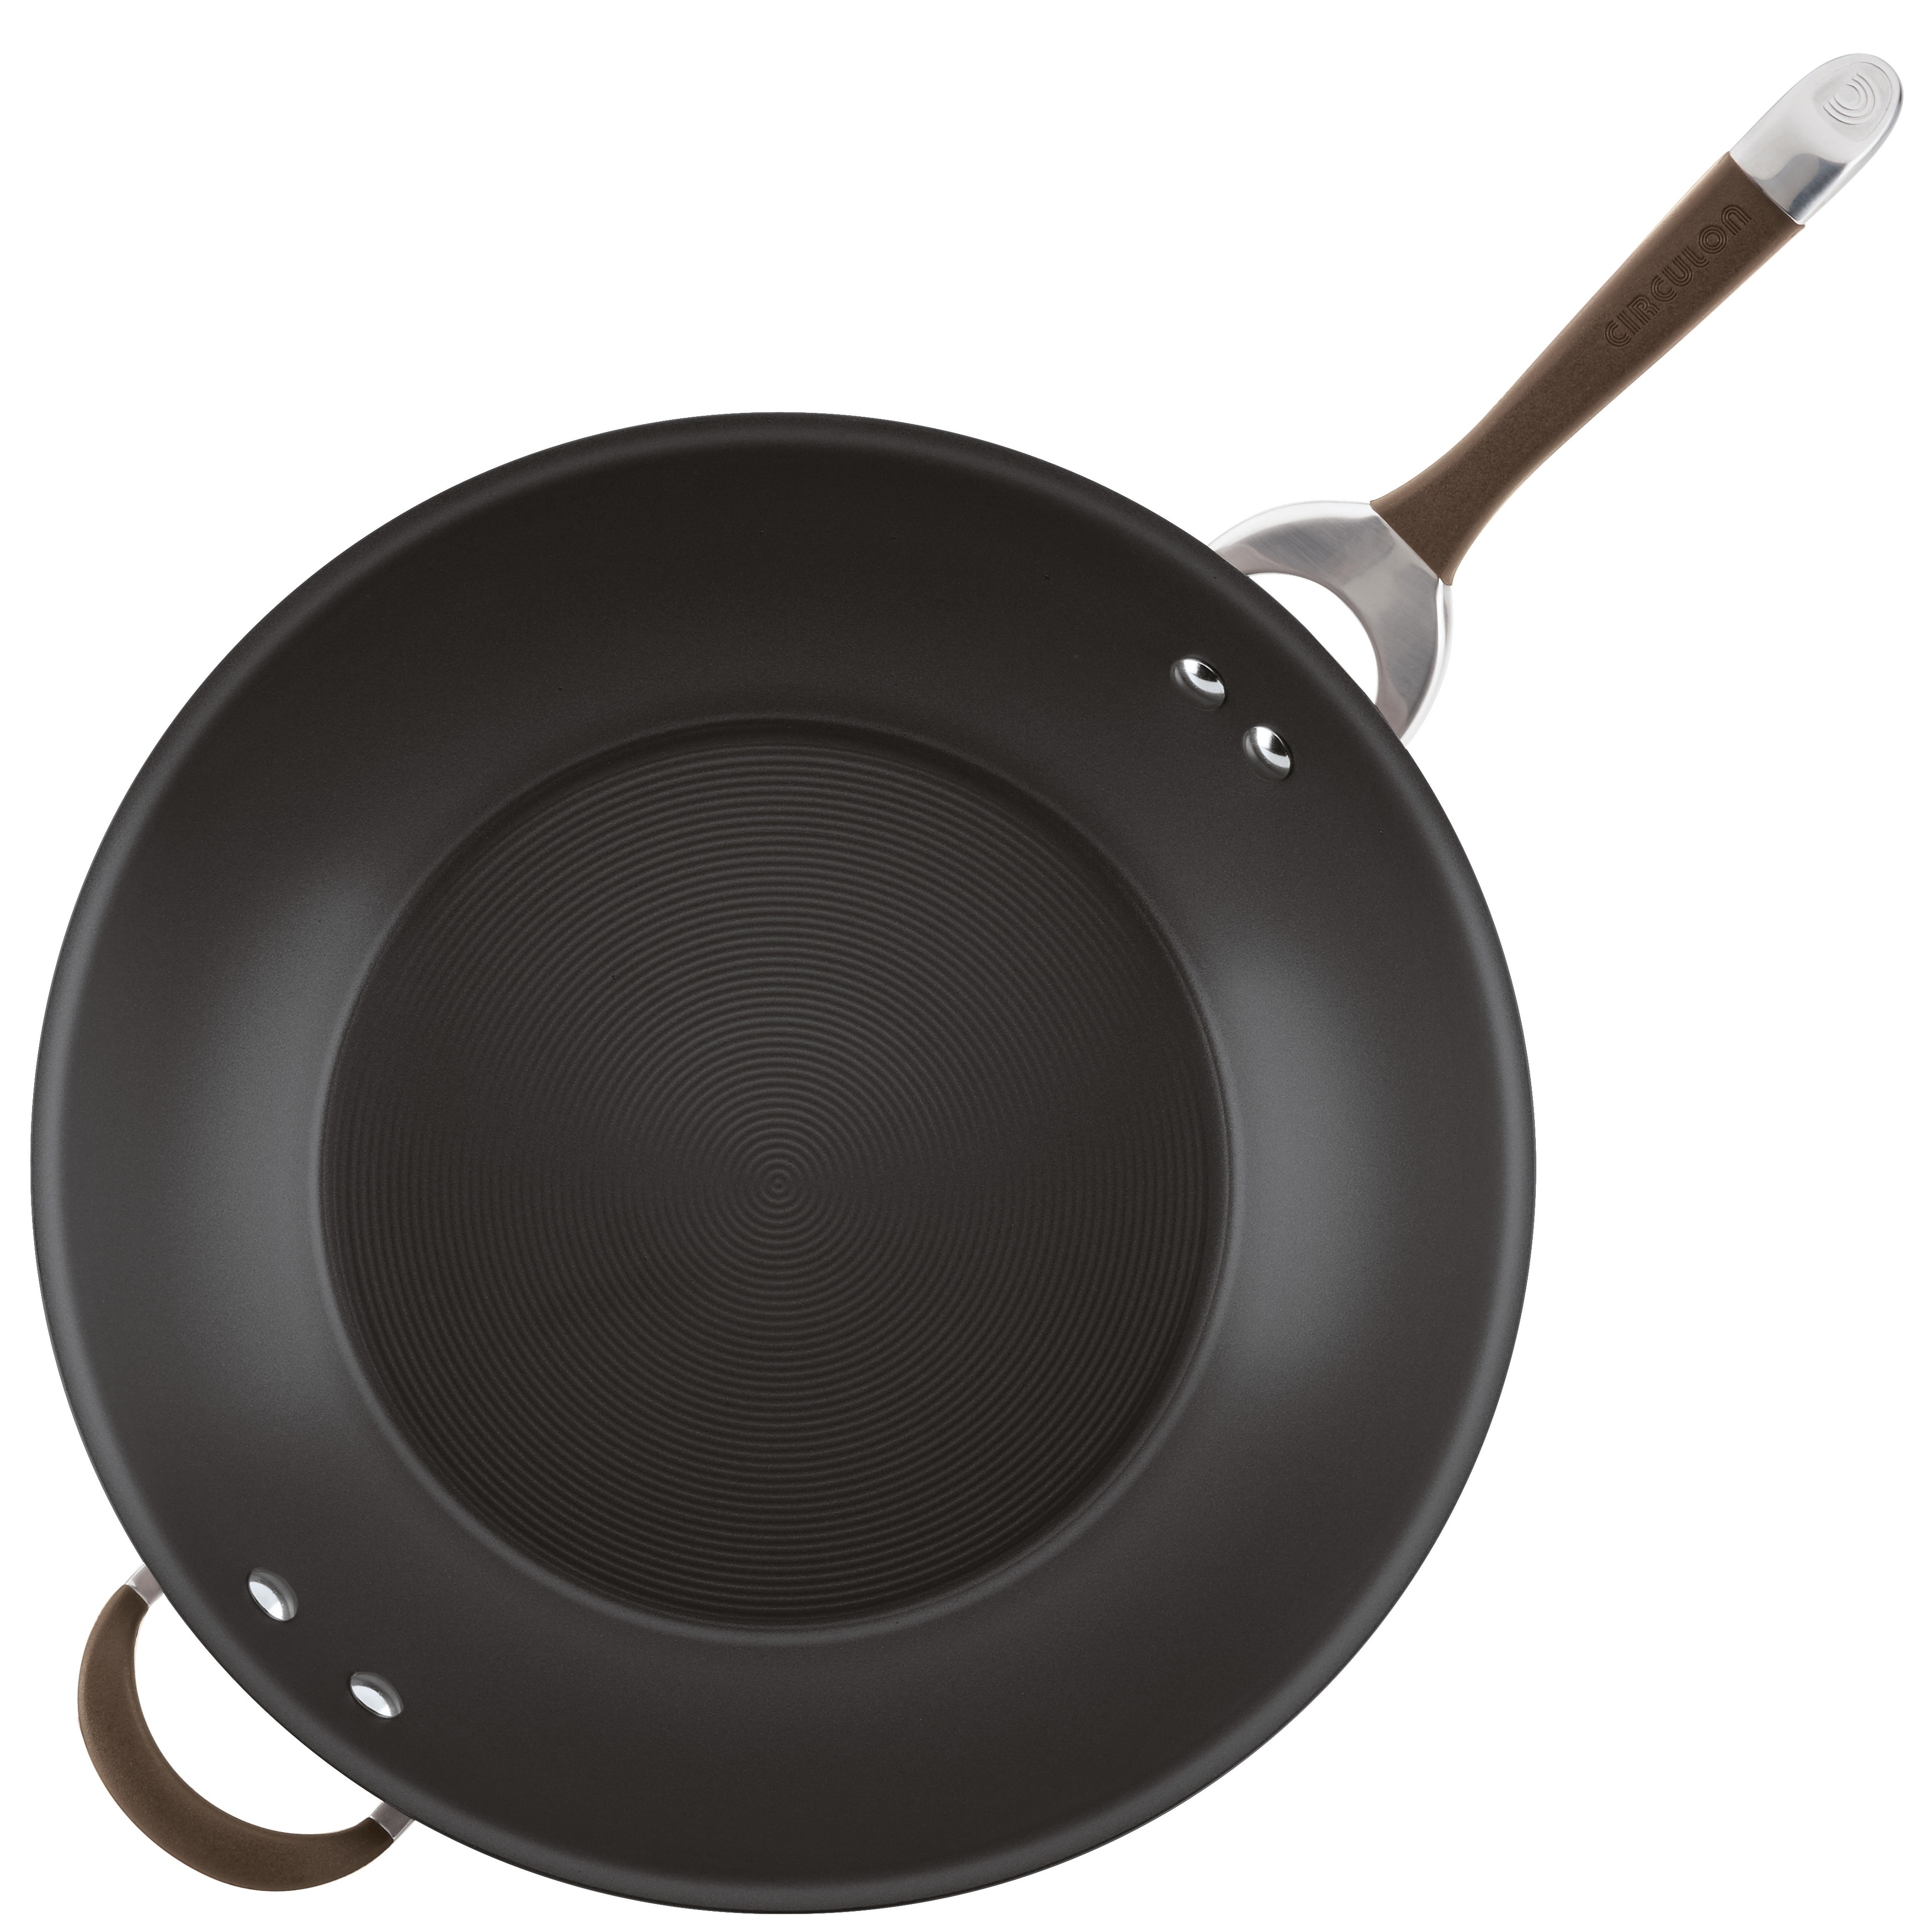 https://ak1.ostkcdn.com/images/products/is/images/direct/3dd6036b36cc21fb821815eaca883d628681edd8/Circulon-Symmetry-Hard-Anodized-Nonstick-Induction-Stir-Fry-Pan-with-Helper-Handle%2C-14-Inch%2C-Chocolate.jpg